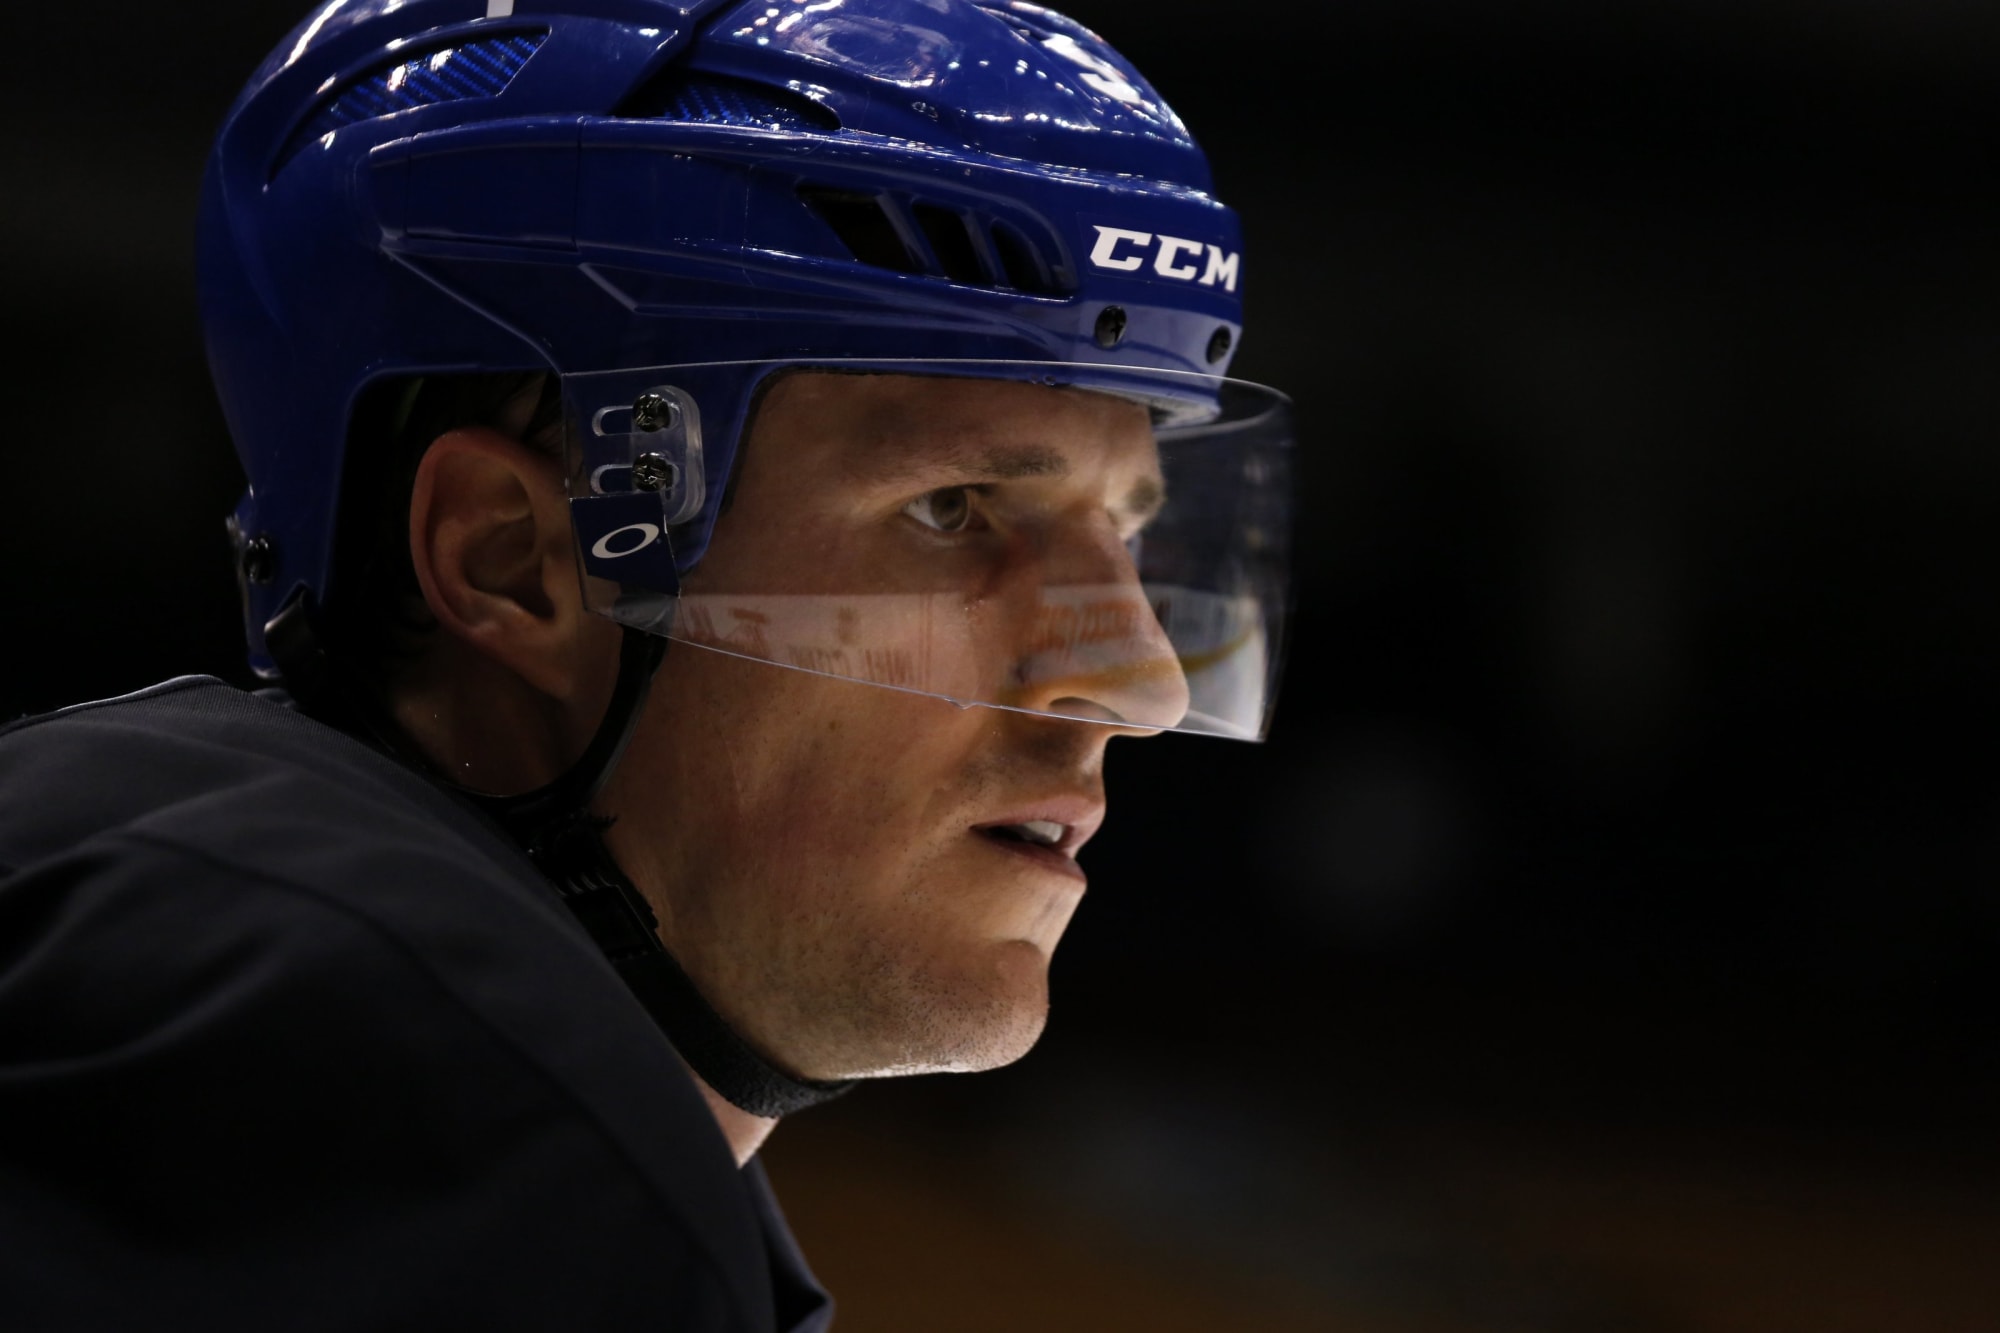 The Leafs were the worst in the Dion Phaneuf years. But the retiring  ex-captain always faced the music, and regrets Stickgate